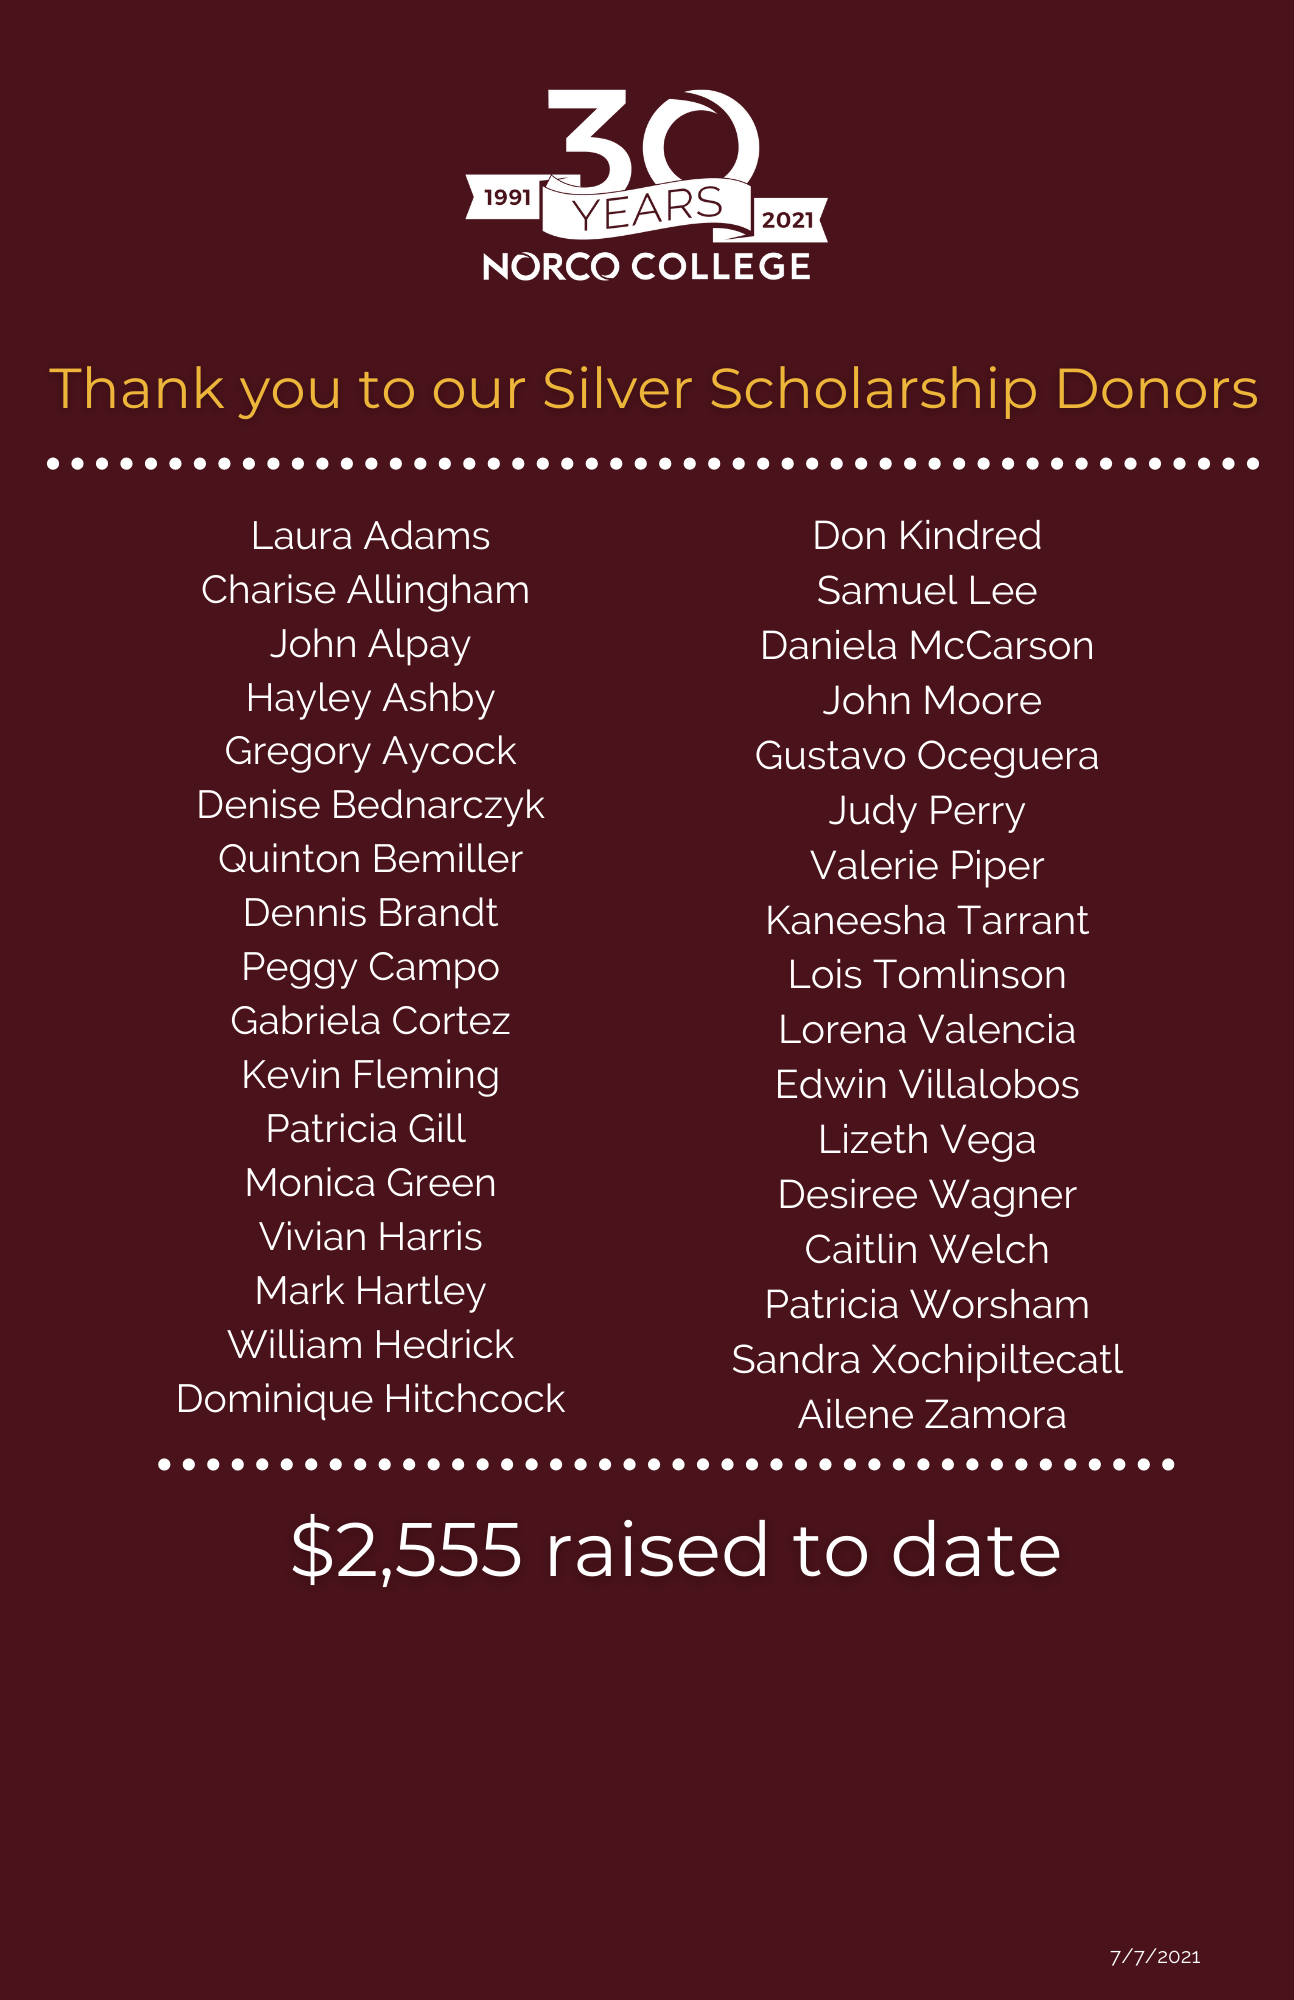 Silver Scholarship Donors image